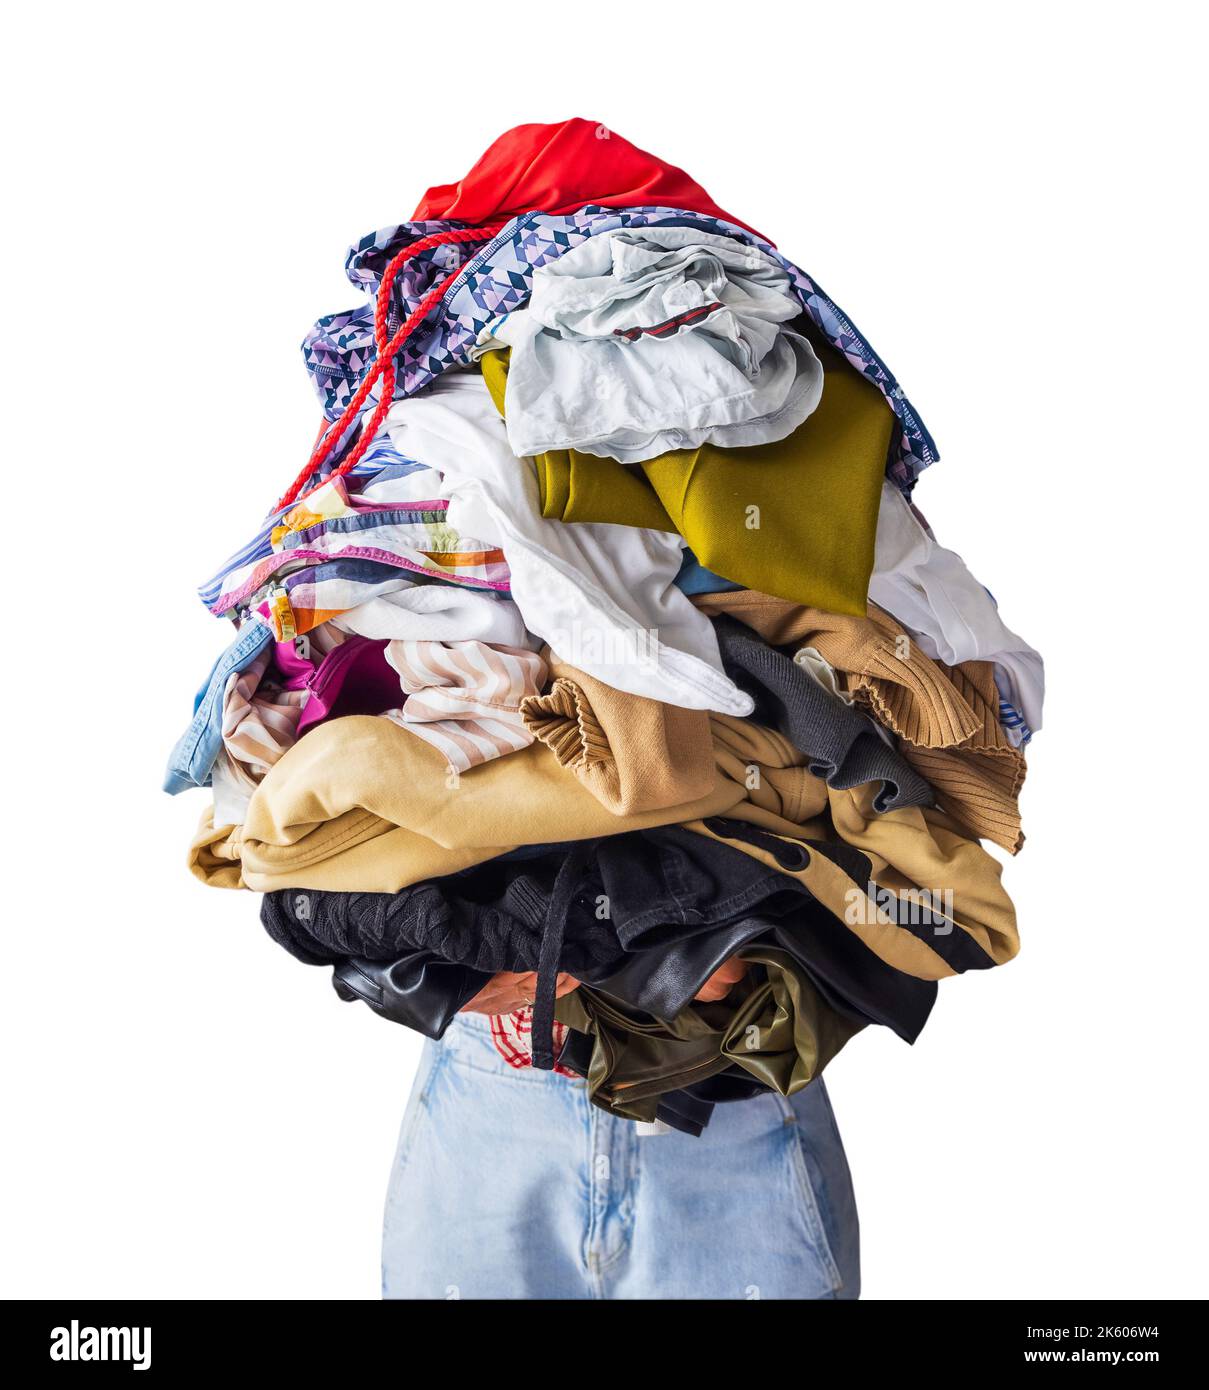 woman holding a lot of crumpled clothes in her hands, isolated object copy-paste Stock Photo